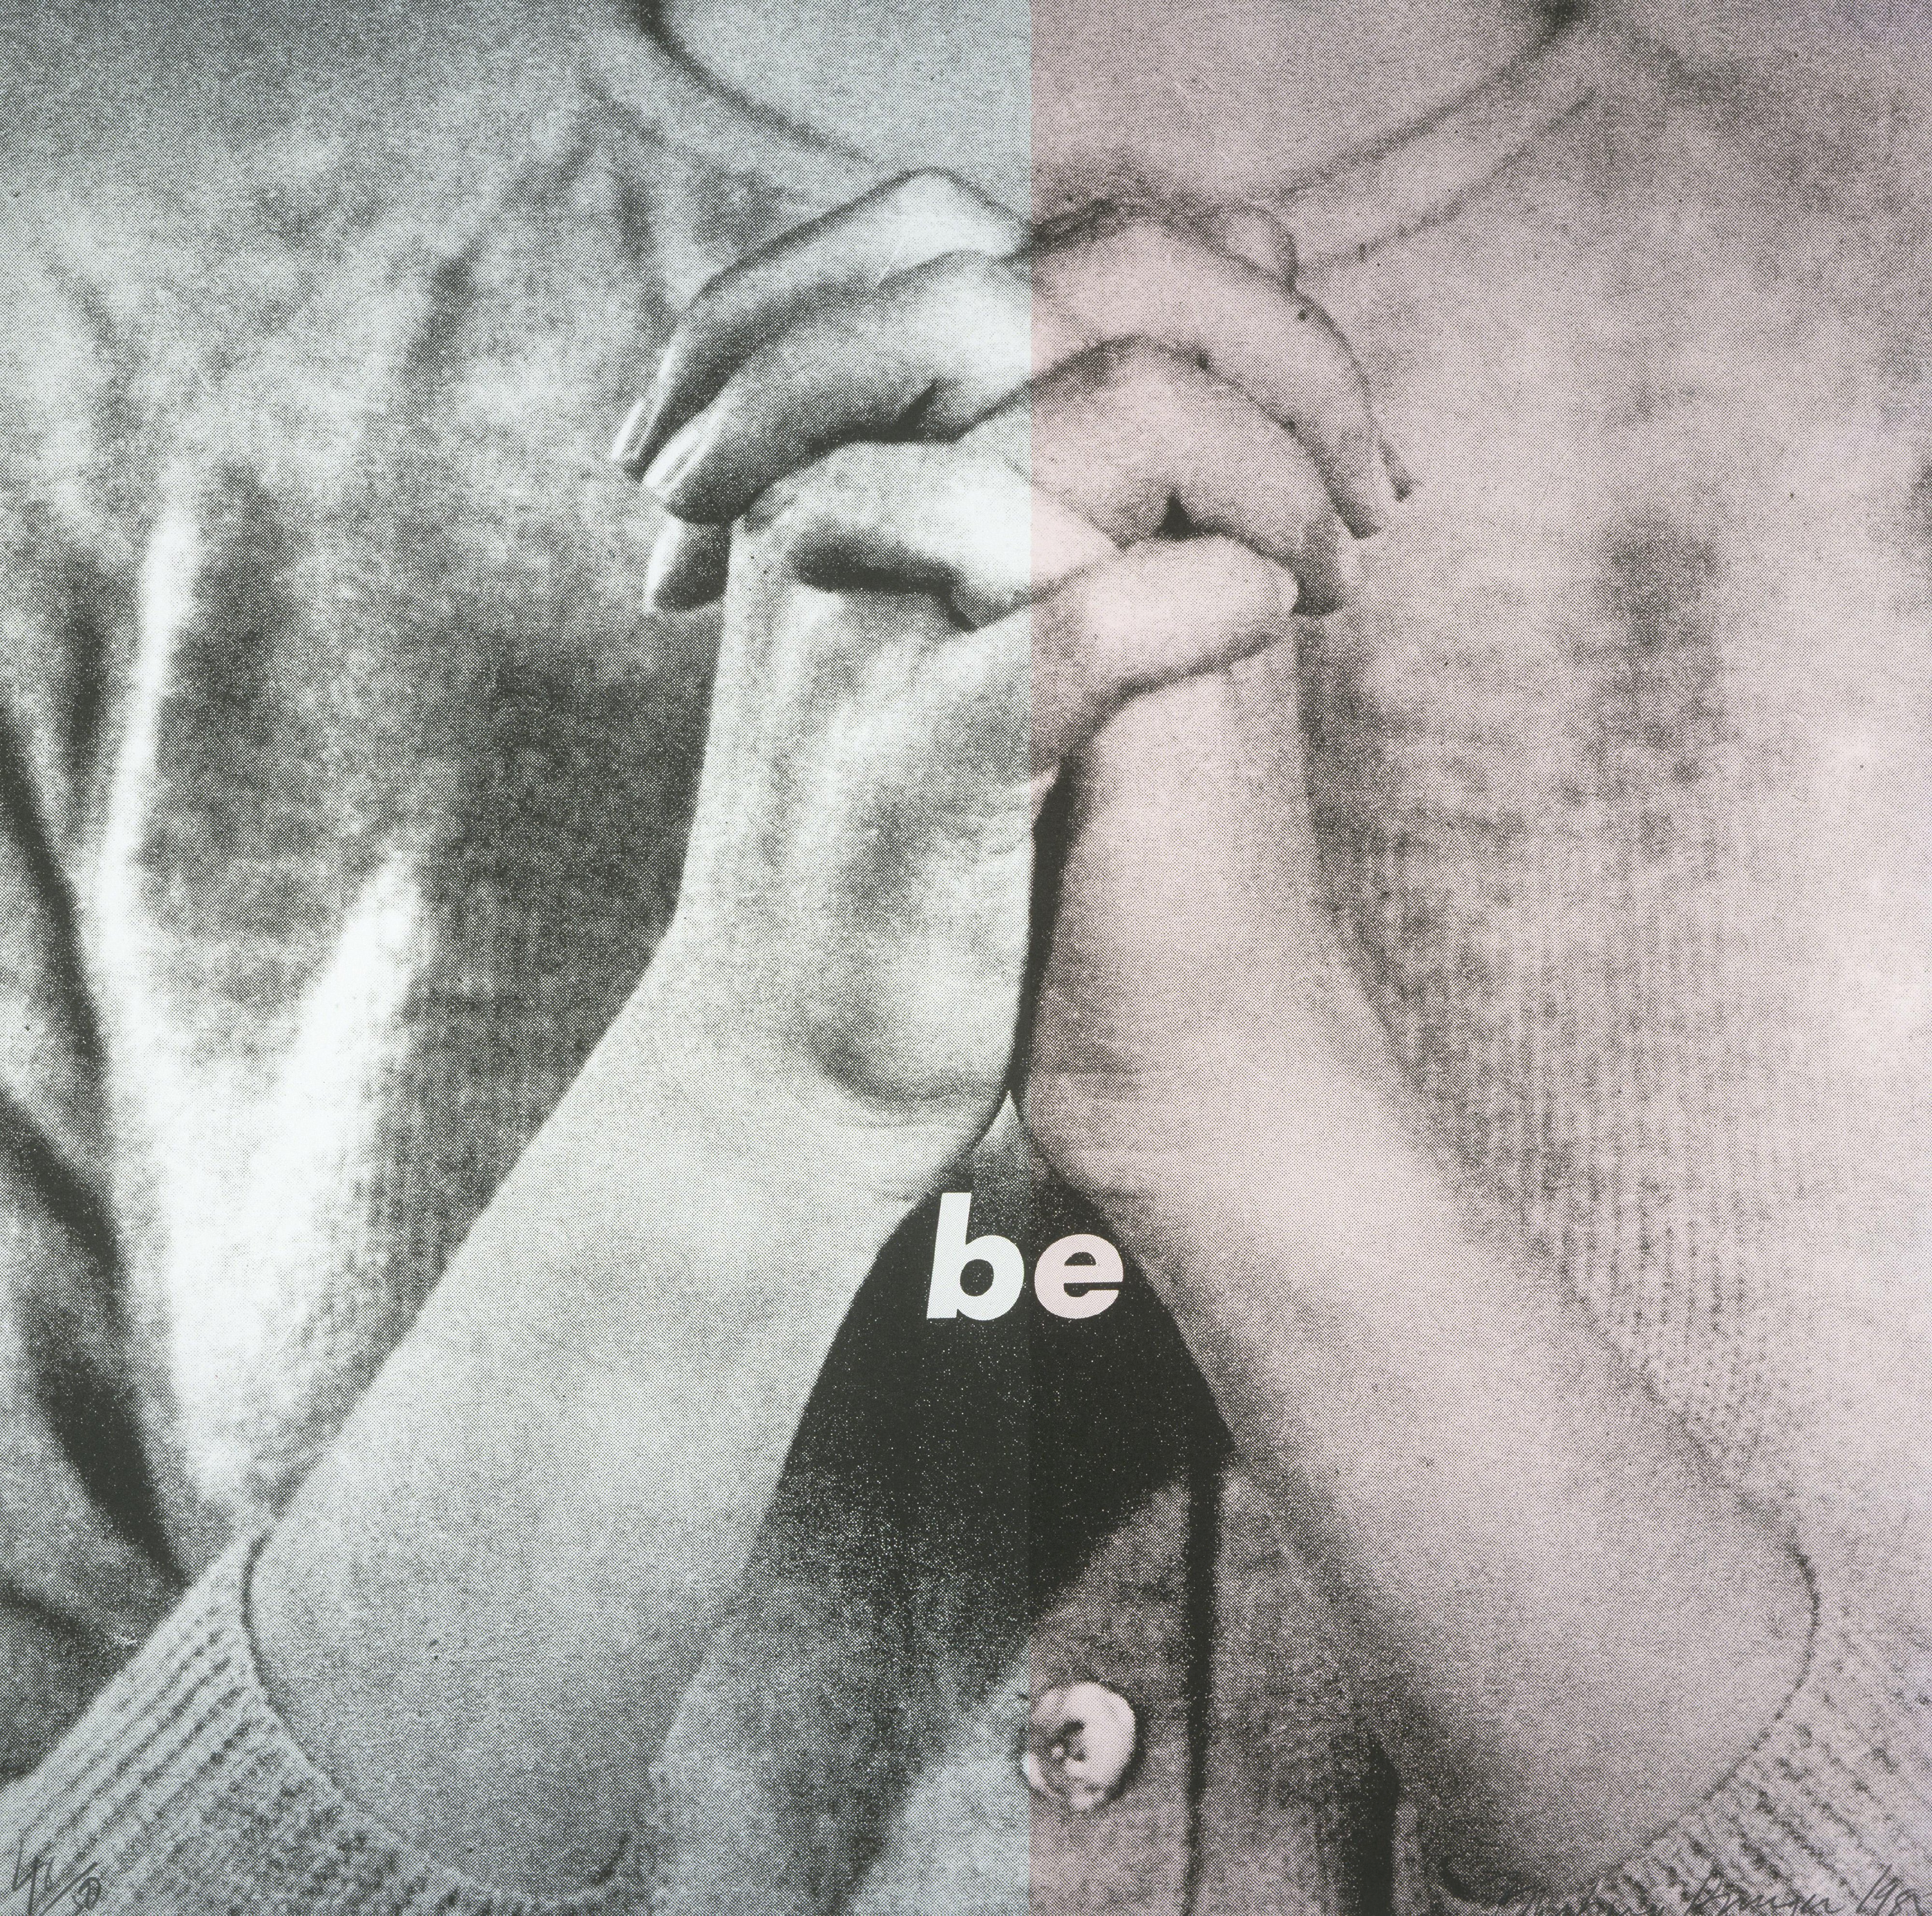 Barbara Kruger. Untitled (We Will No Longer Be Seen and Not Heard). 1985. Source: Philadelphia Museum of Art